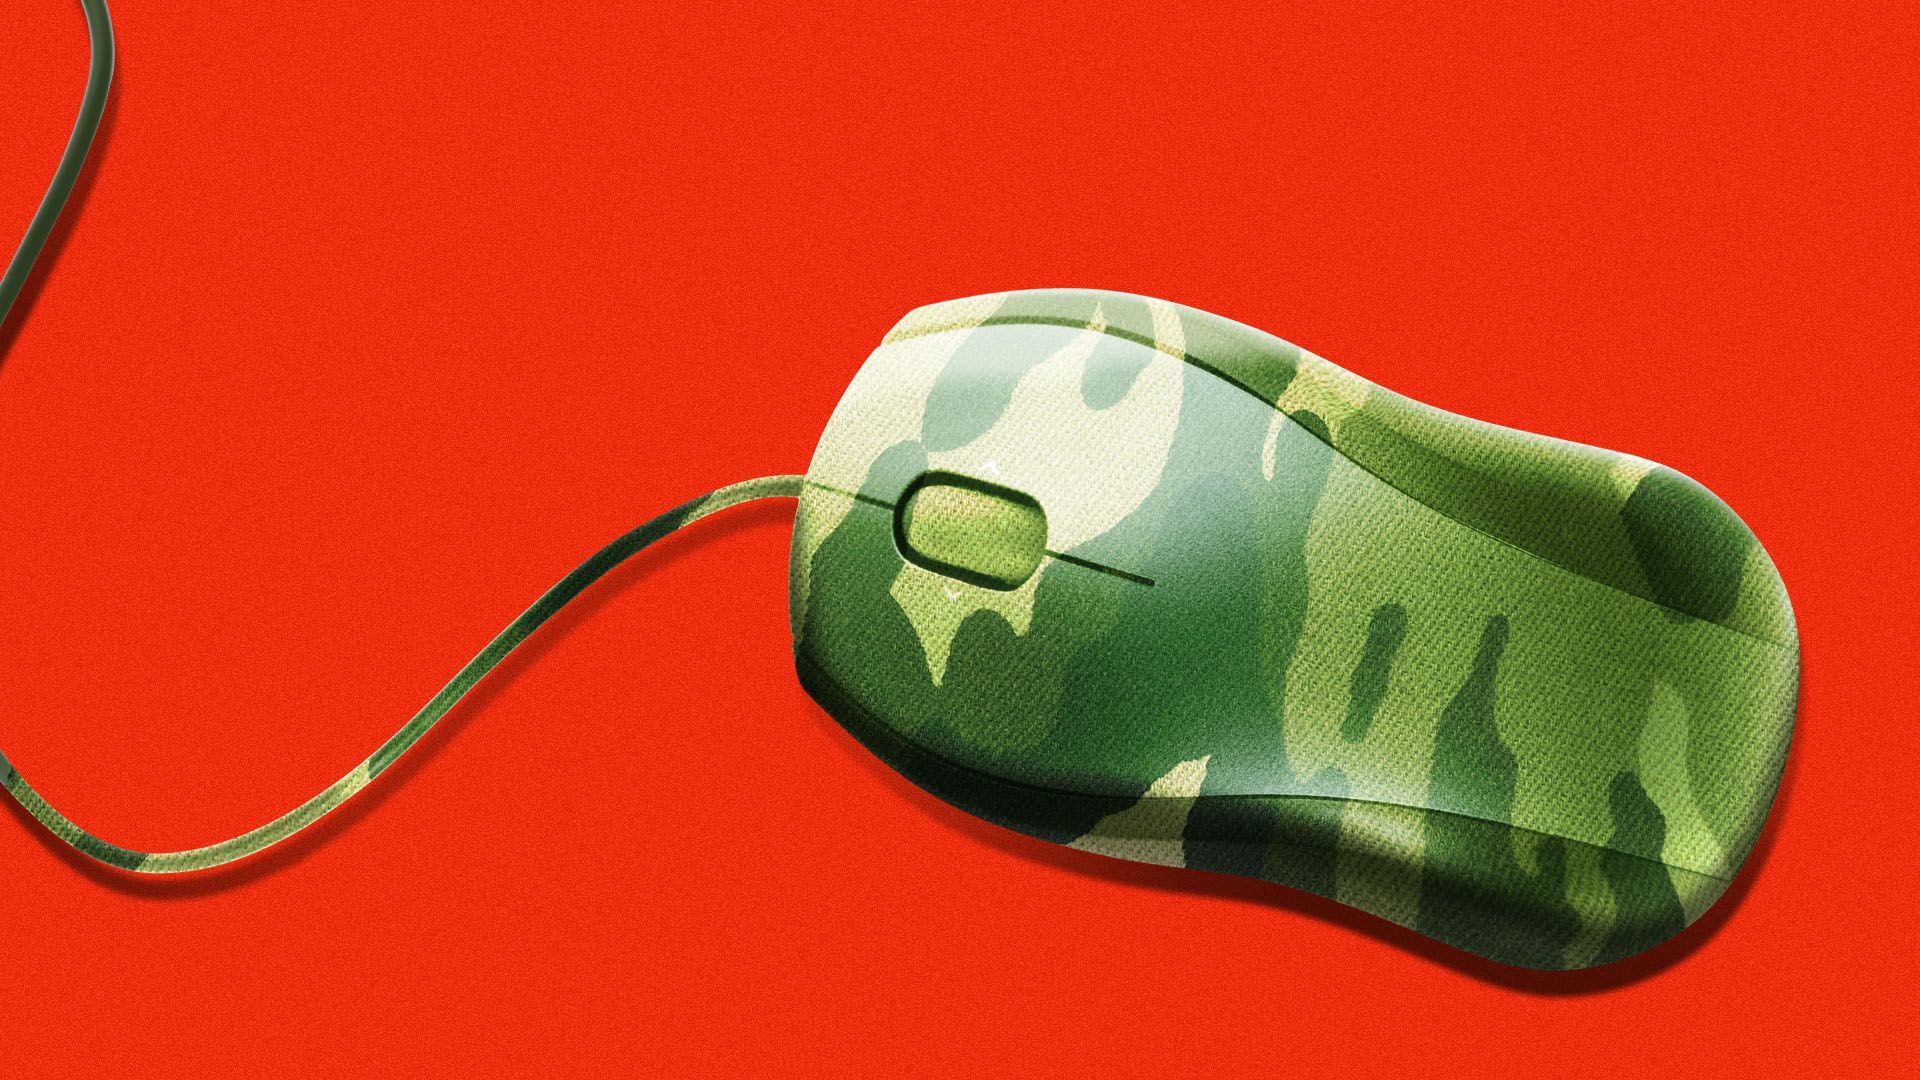 Illustration of a computer mouse with an Army camouflage design over it